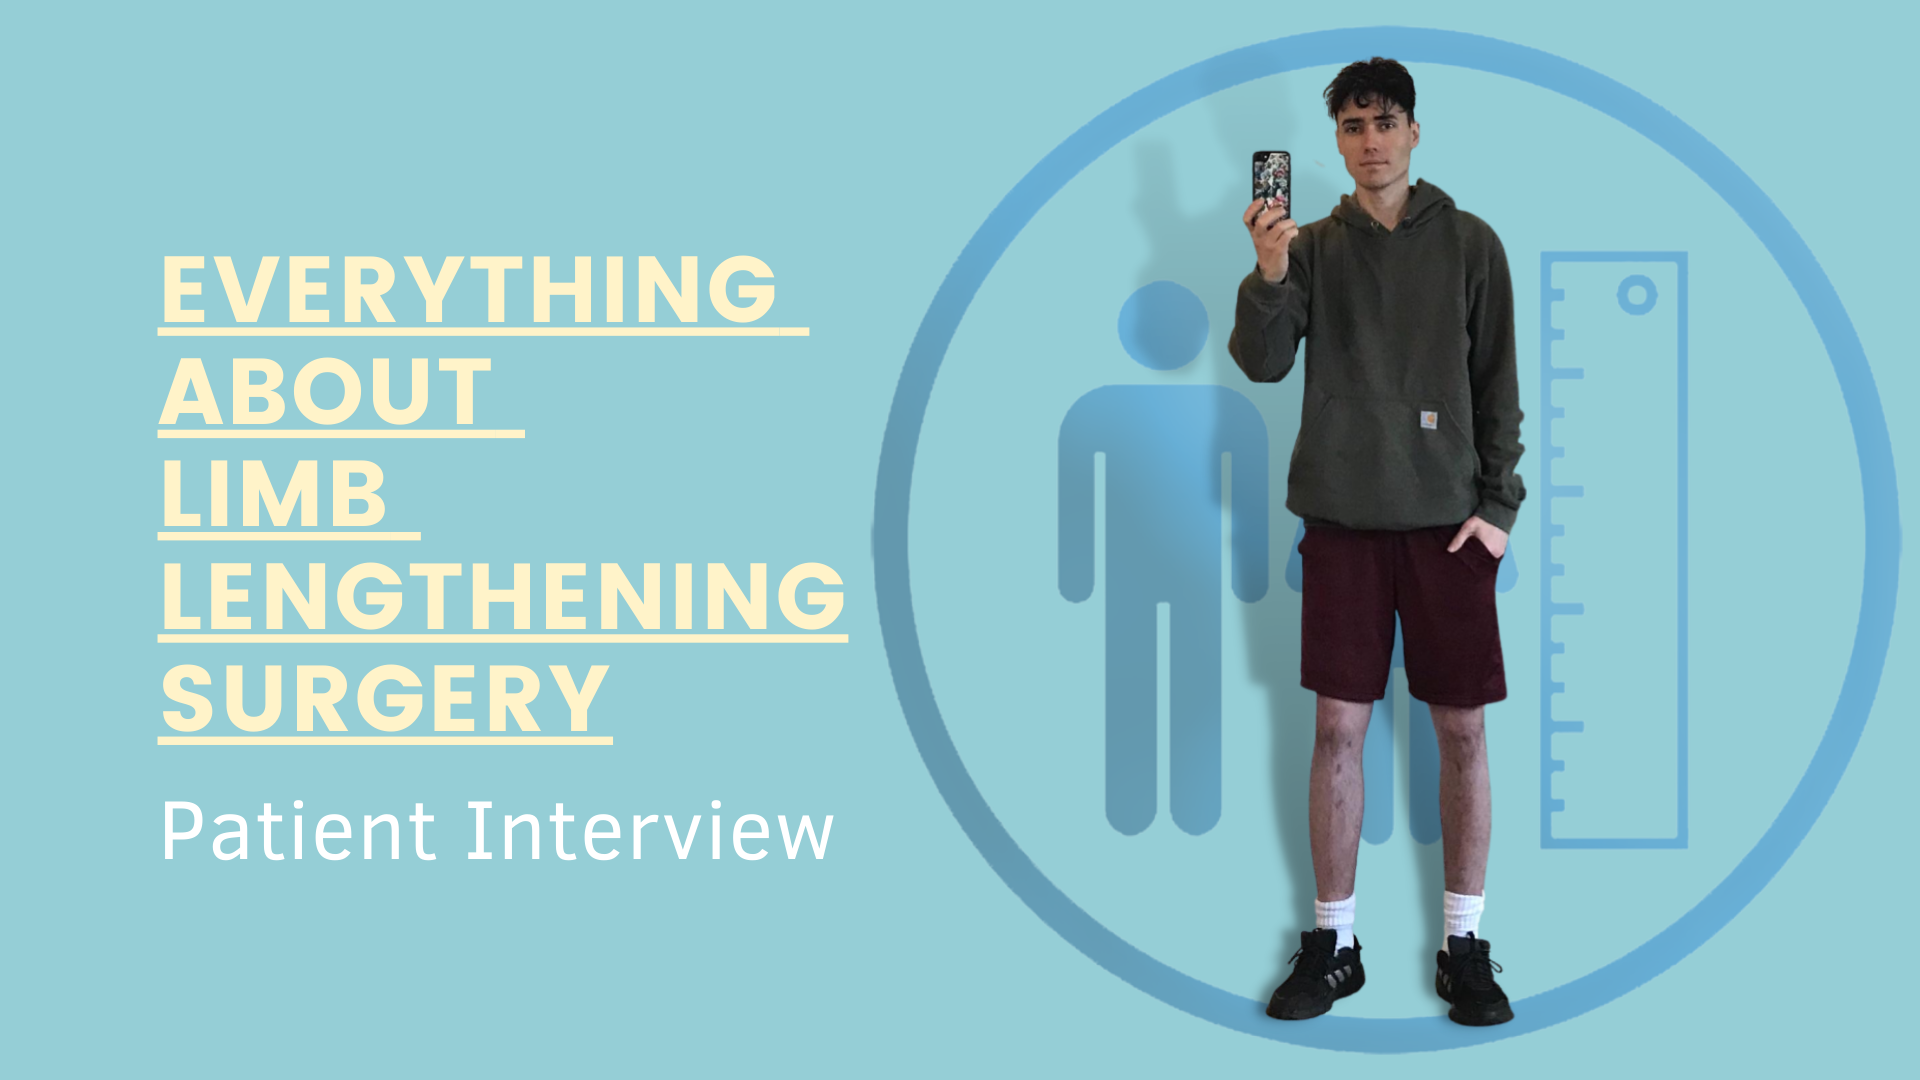 Everything About Limb Lengthening Surgery - Patient Interview